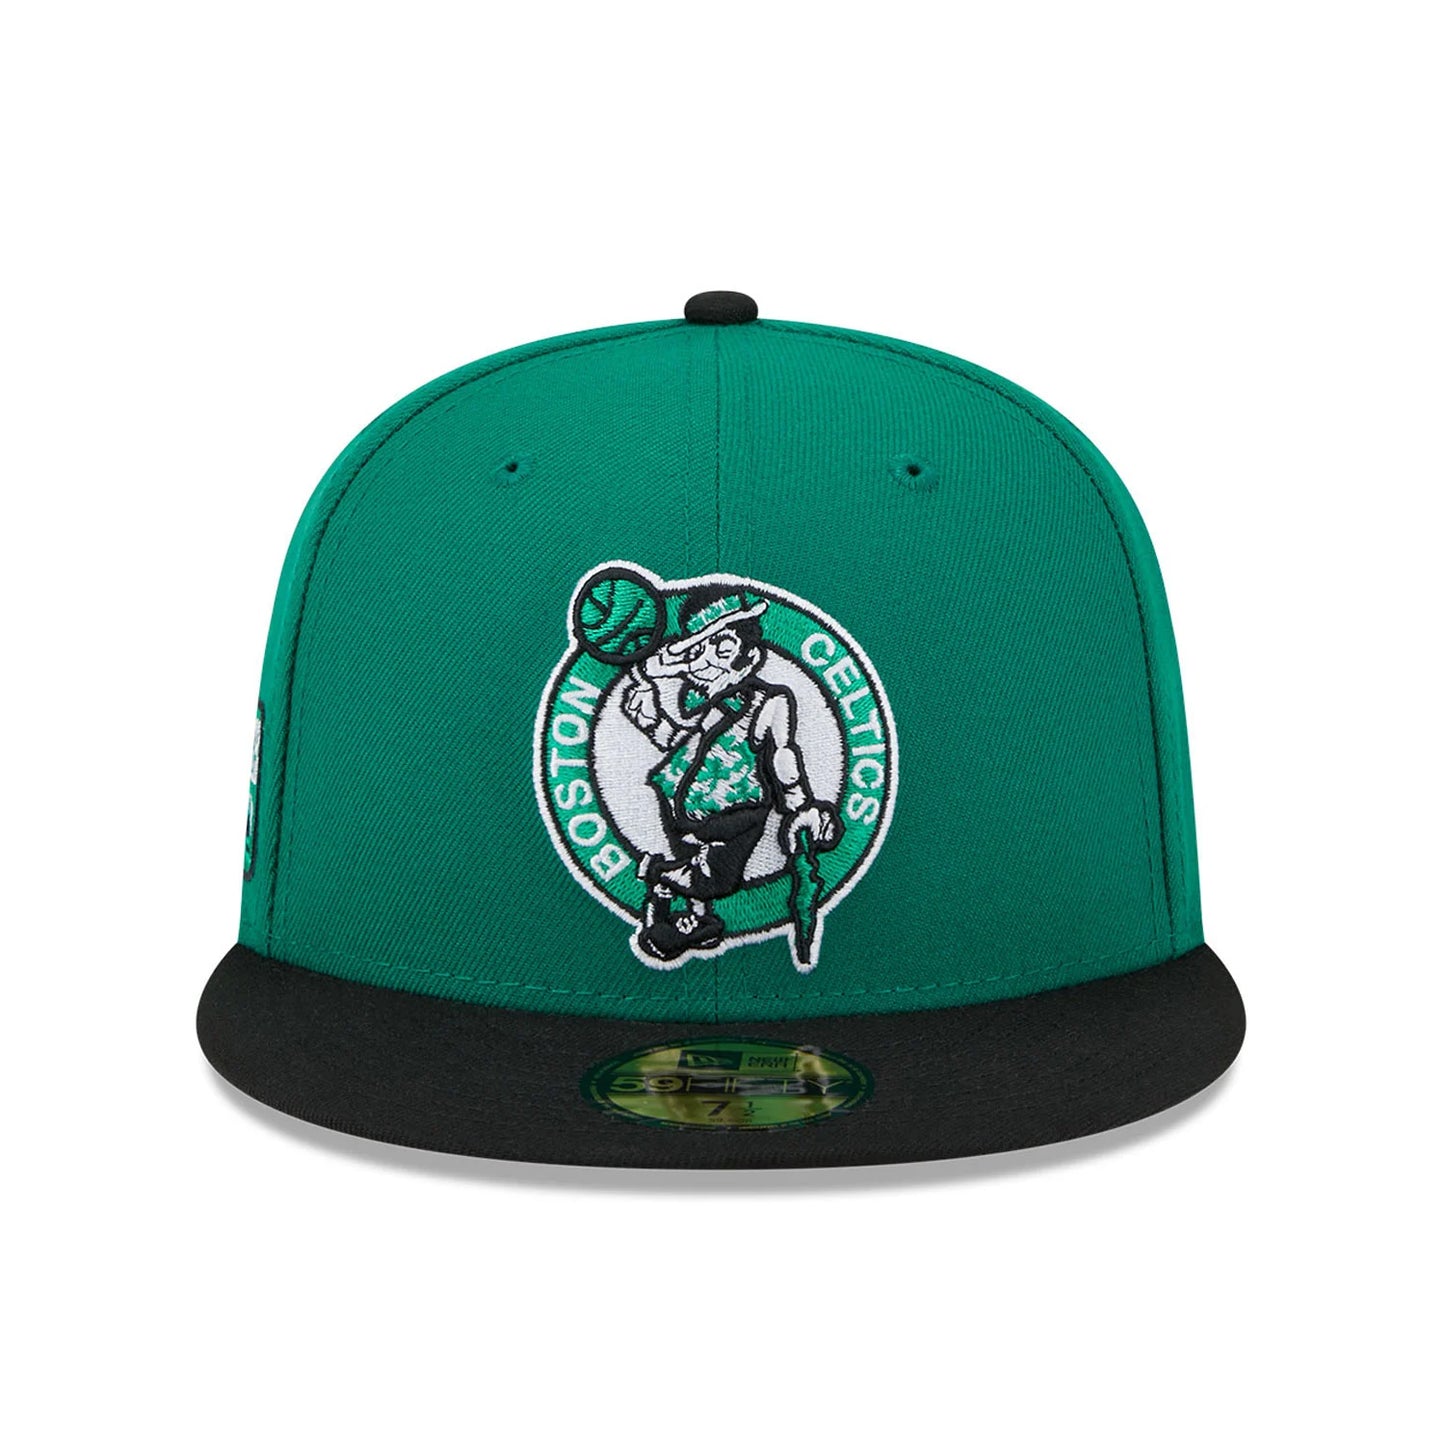 NEW ERA Boston Celtics NBA All Star Game Green 59FIFTY Fitted Cap